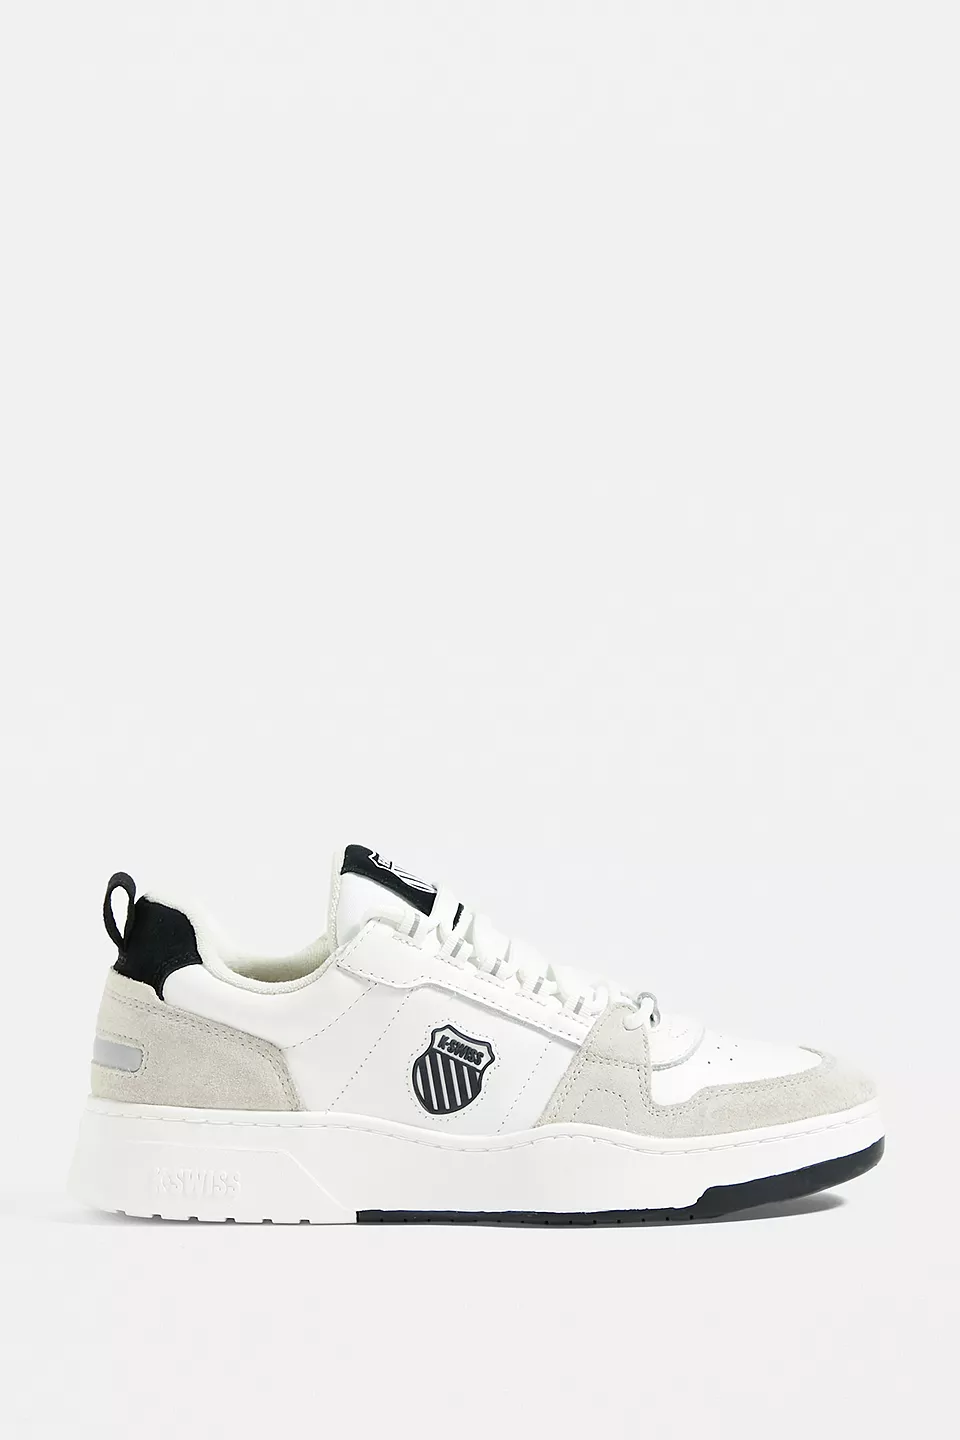 urbanoutfitters.com | K-Swiss Sneakers Cannonshield LTH